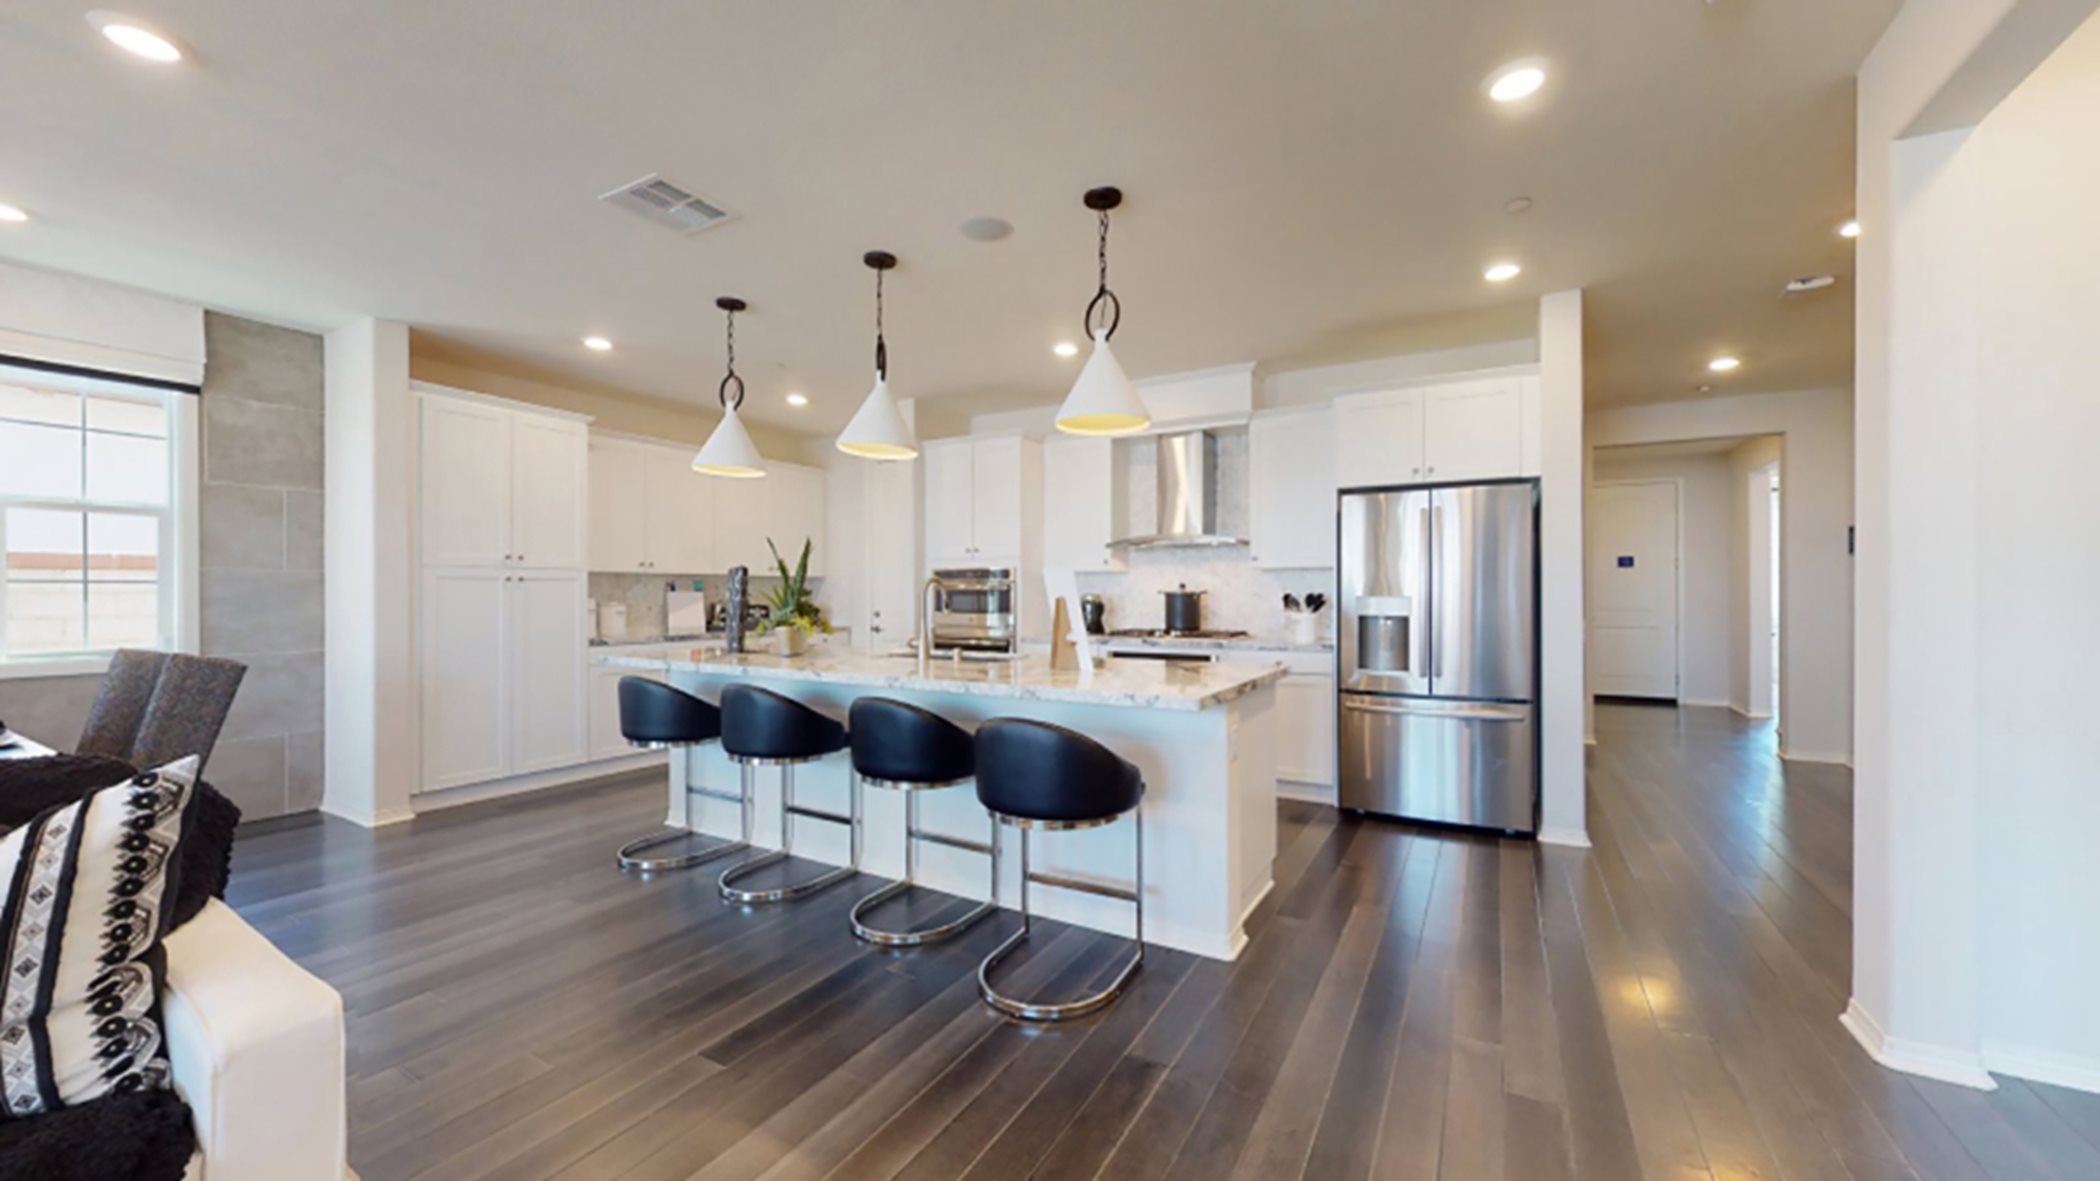 Kitchen with center island, appliances, and ample cabinetry